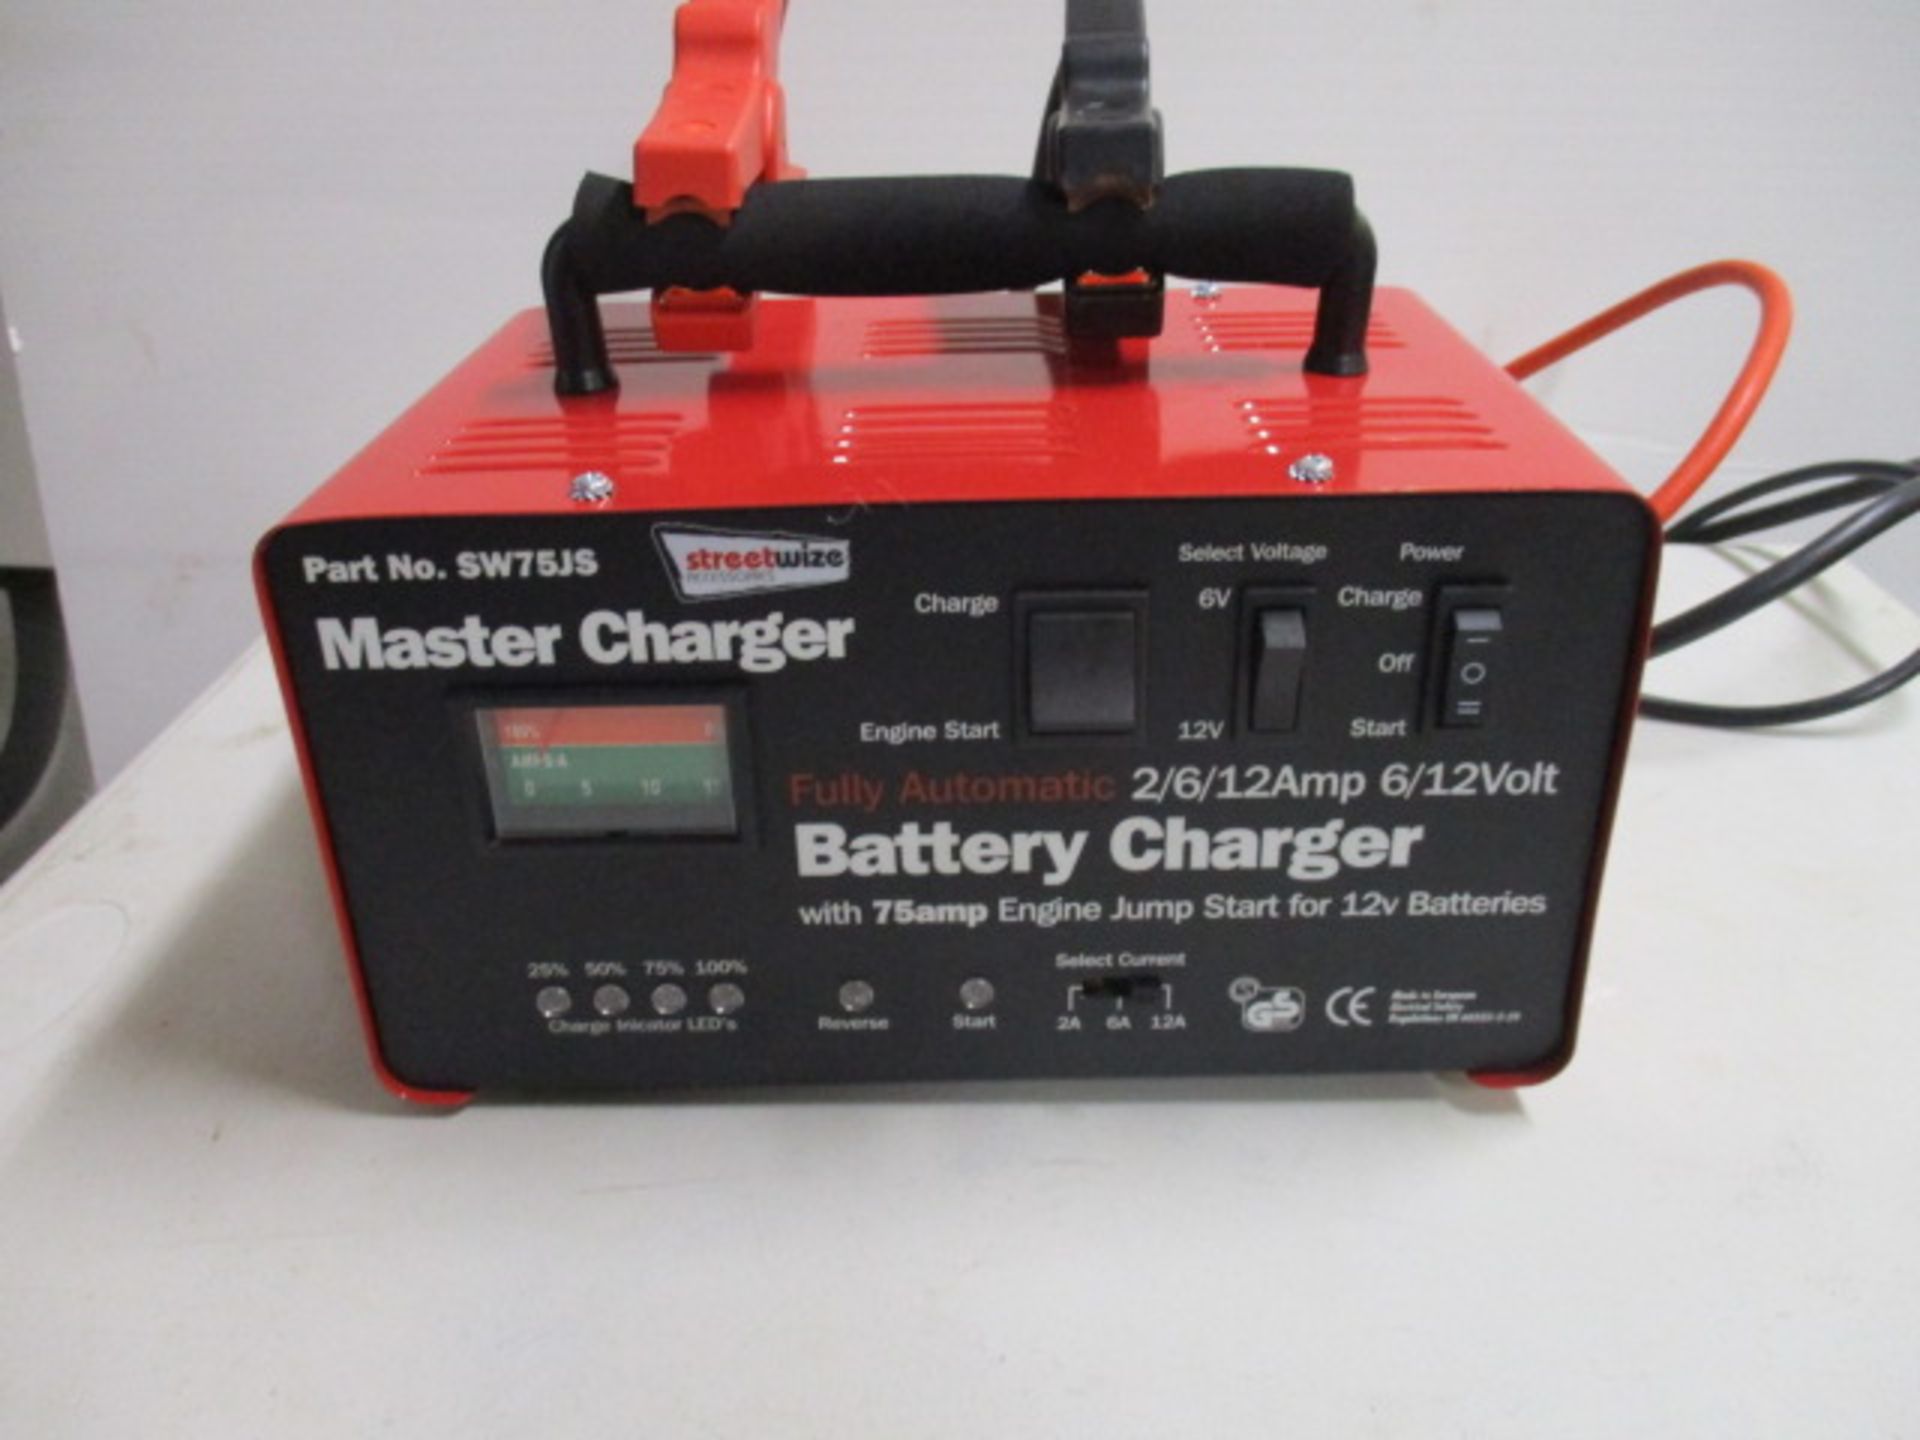 New Streetwize SW75JS fully automatic 2/6/12amp 6/12V battery charger with 75amp jump start unboxed